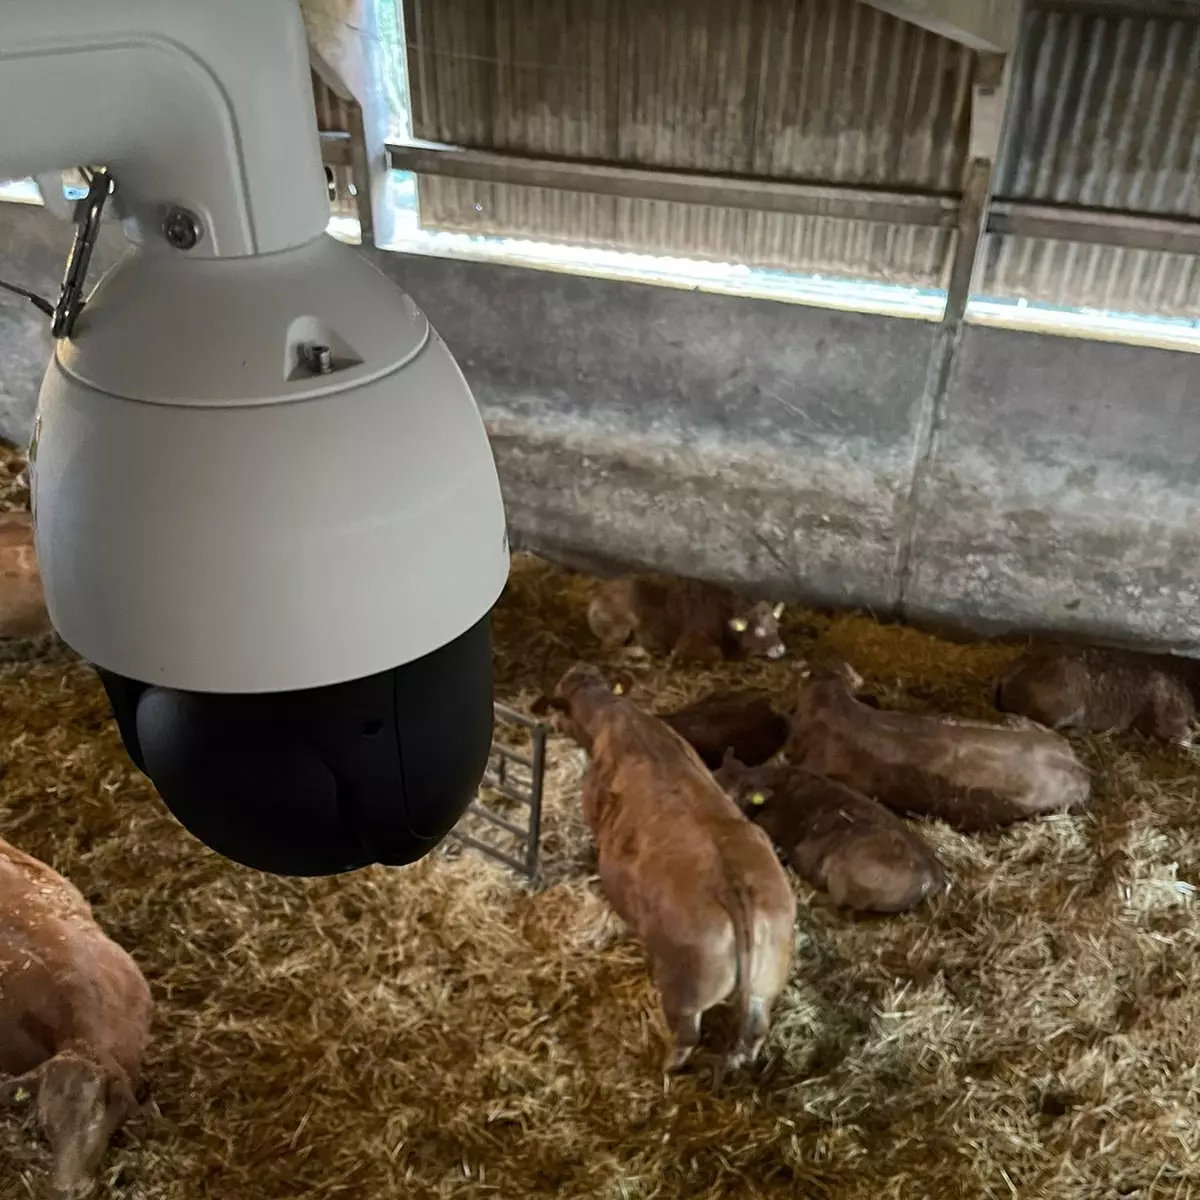 Choose How You Would Like To Install Your Livestock Camera